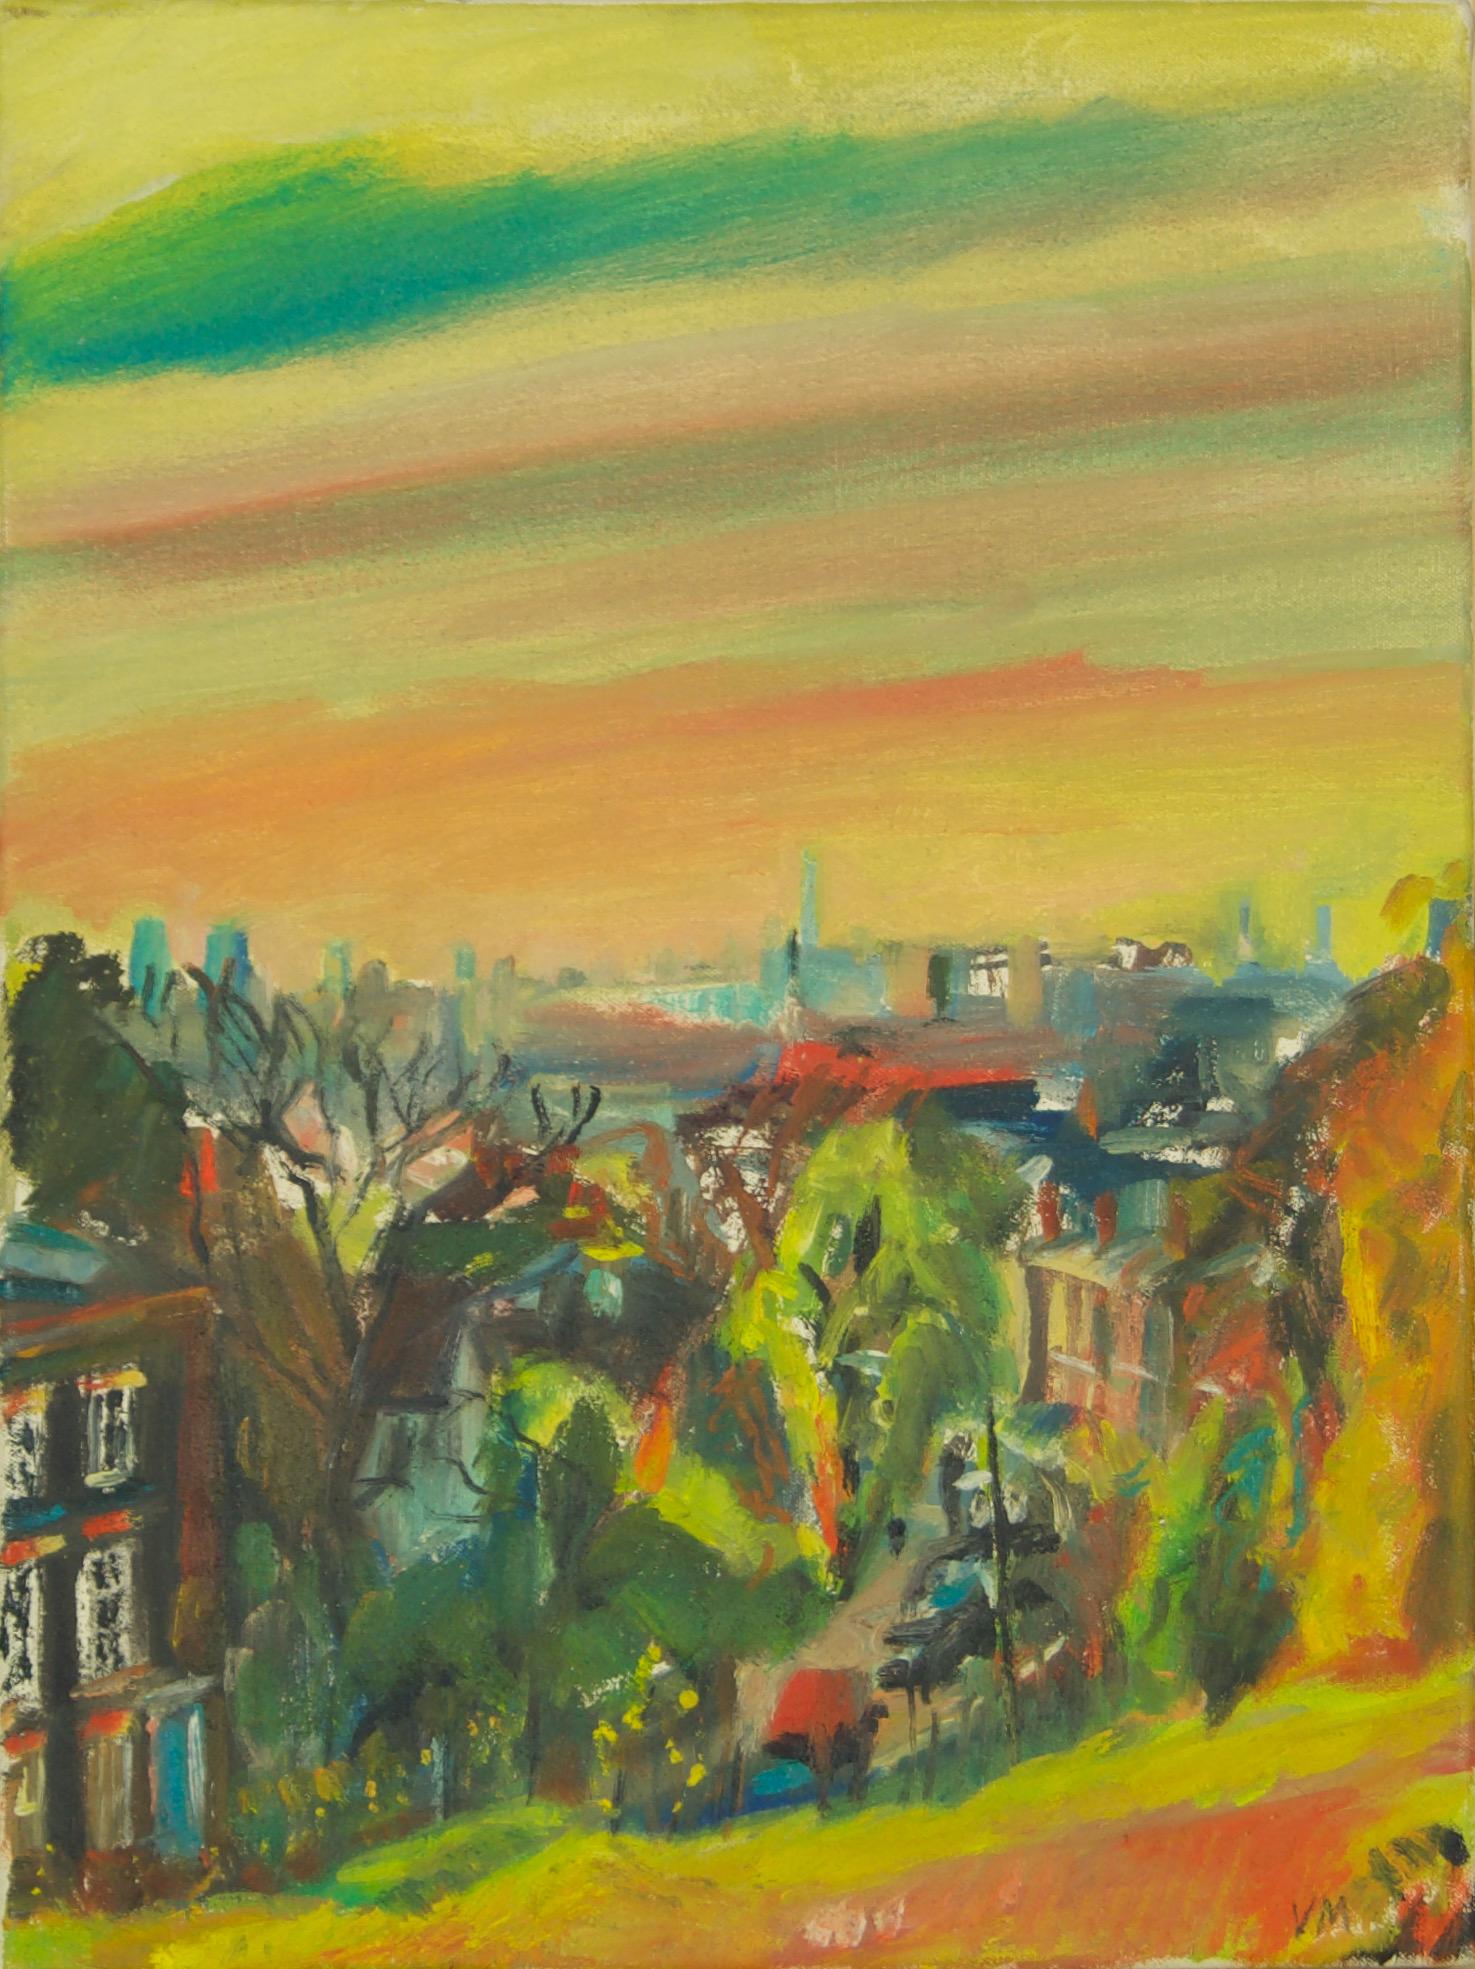 London Suburb - Late 20th Century Landscape Oil in London by Milne - Art by Vincent Milne